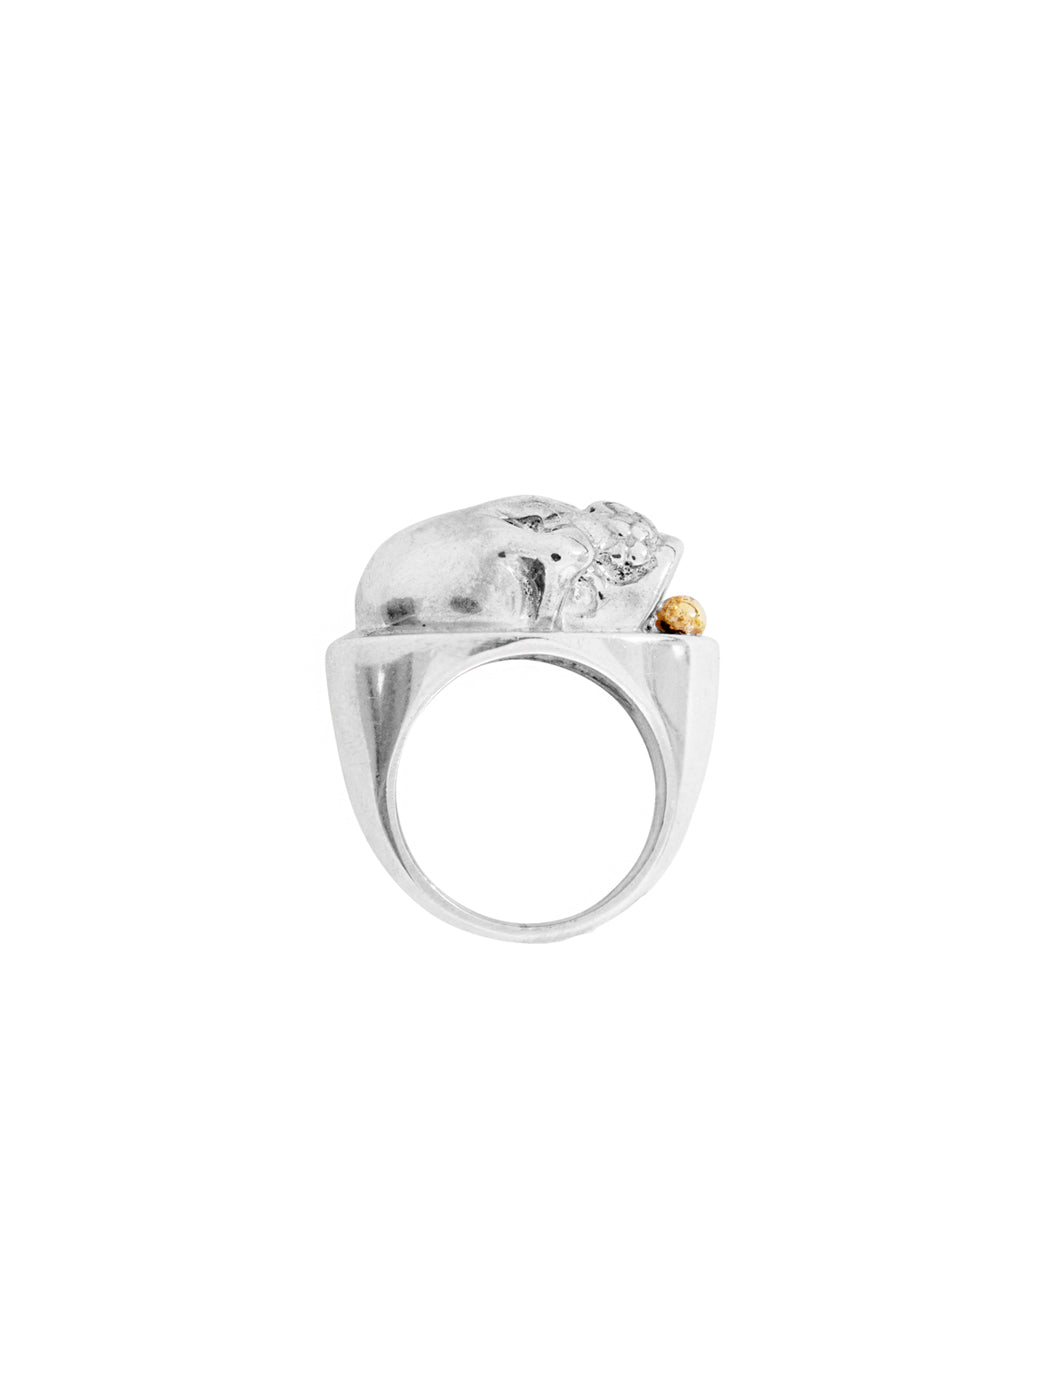 Fiorina Jewellery Silver Skull Ring Side View